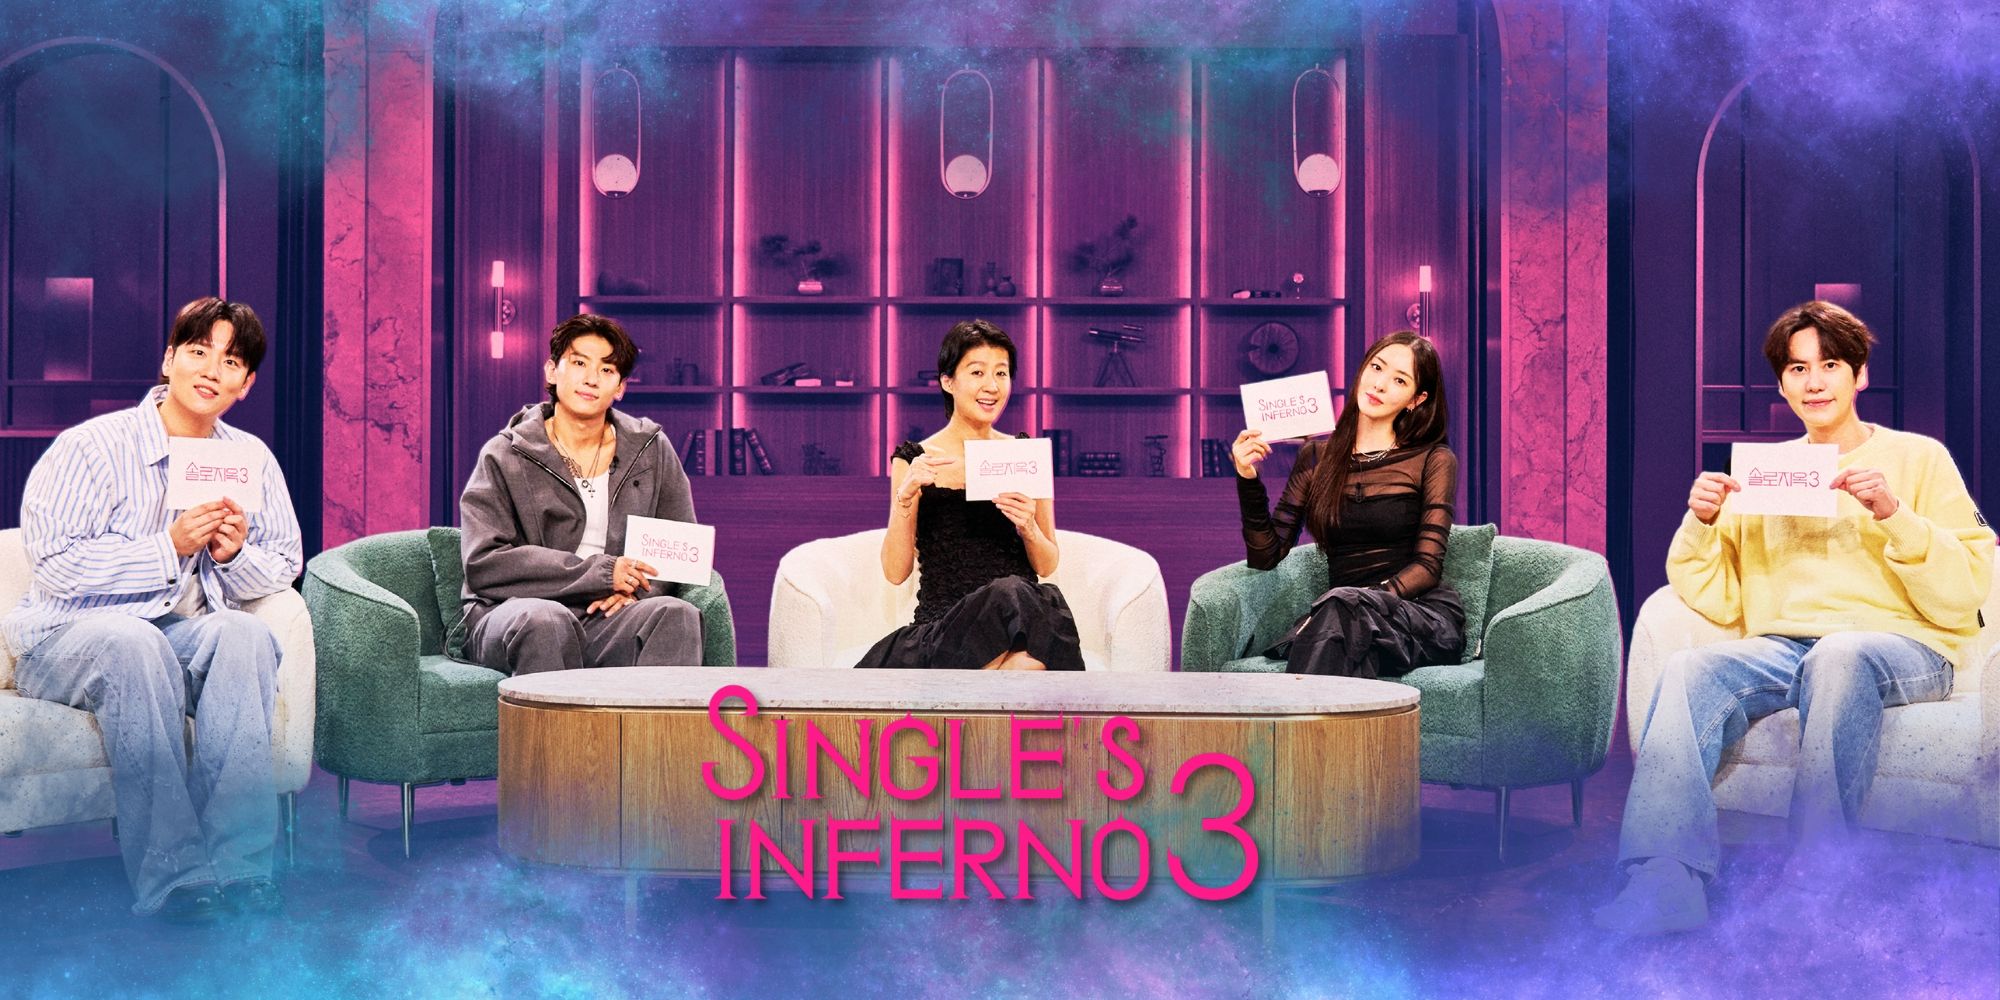 Single's Inferno Season 3 Release Schedule of Episodes Revealed by